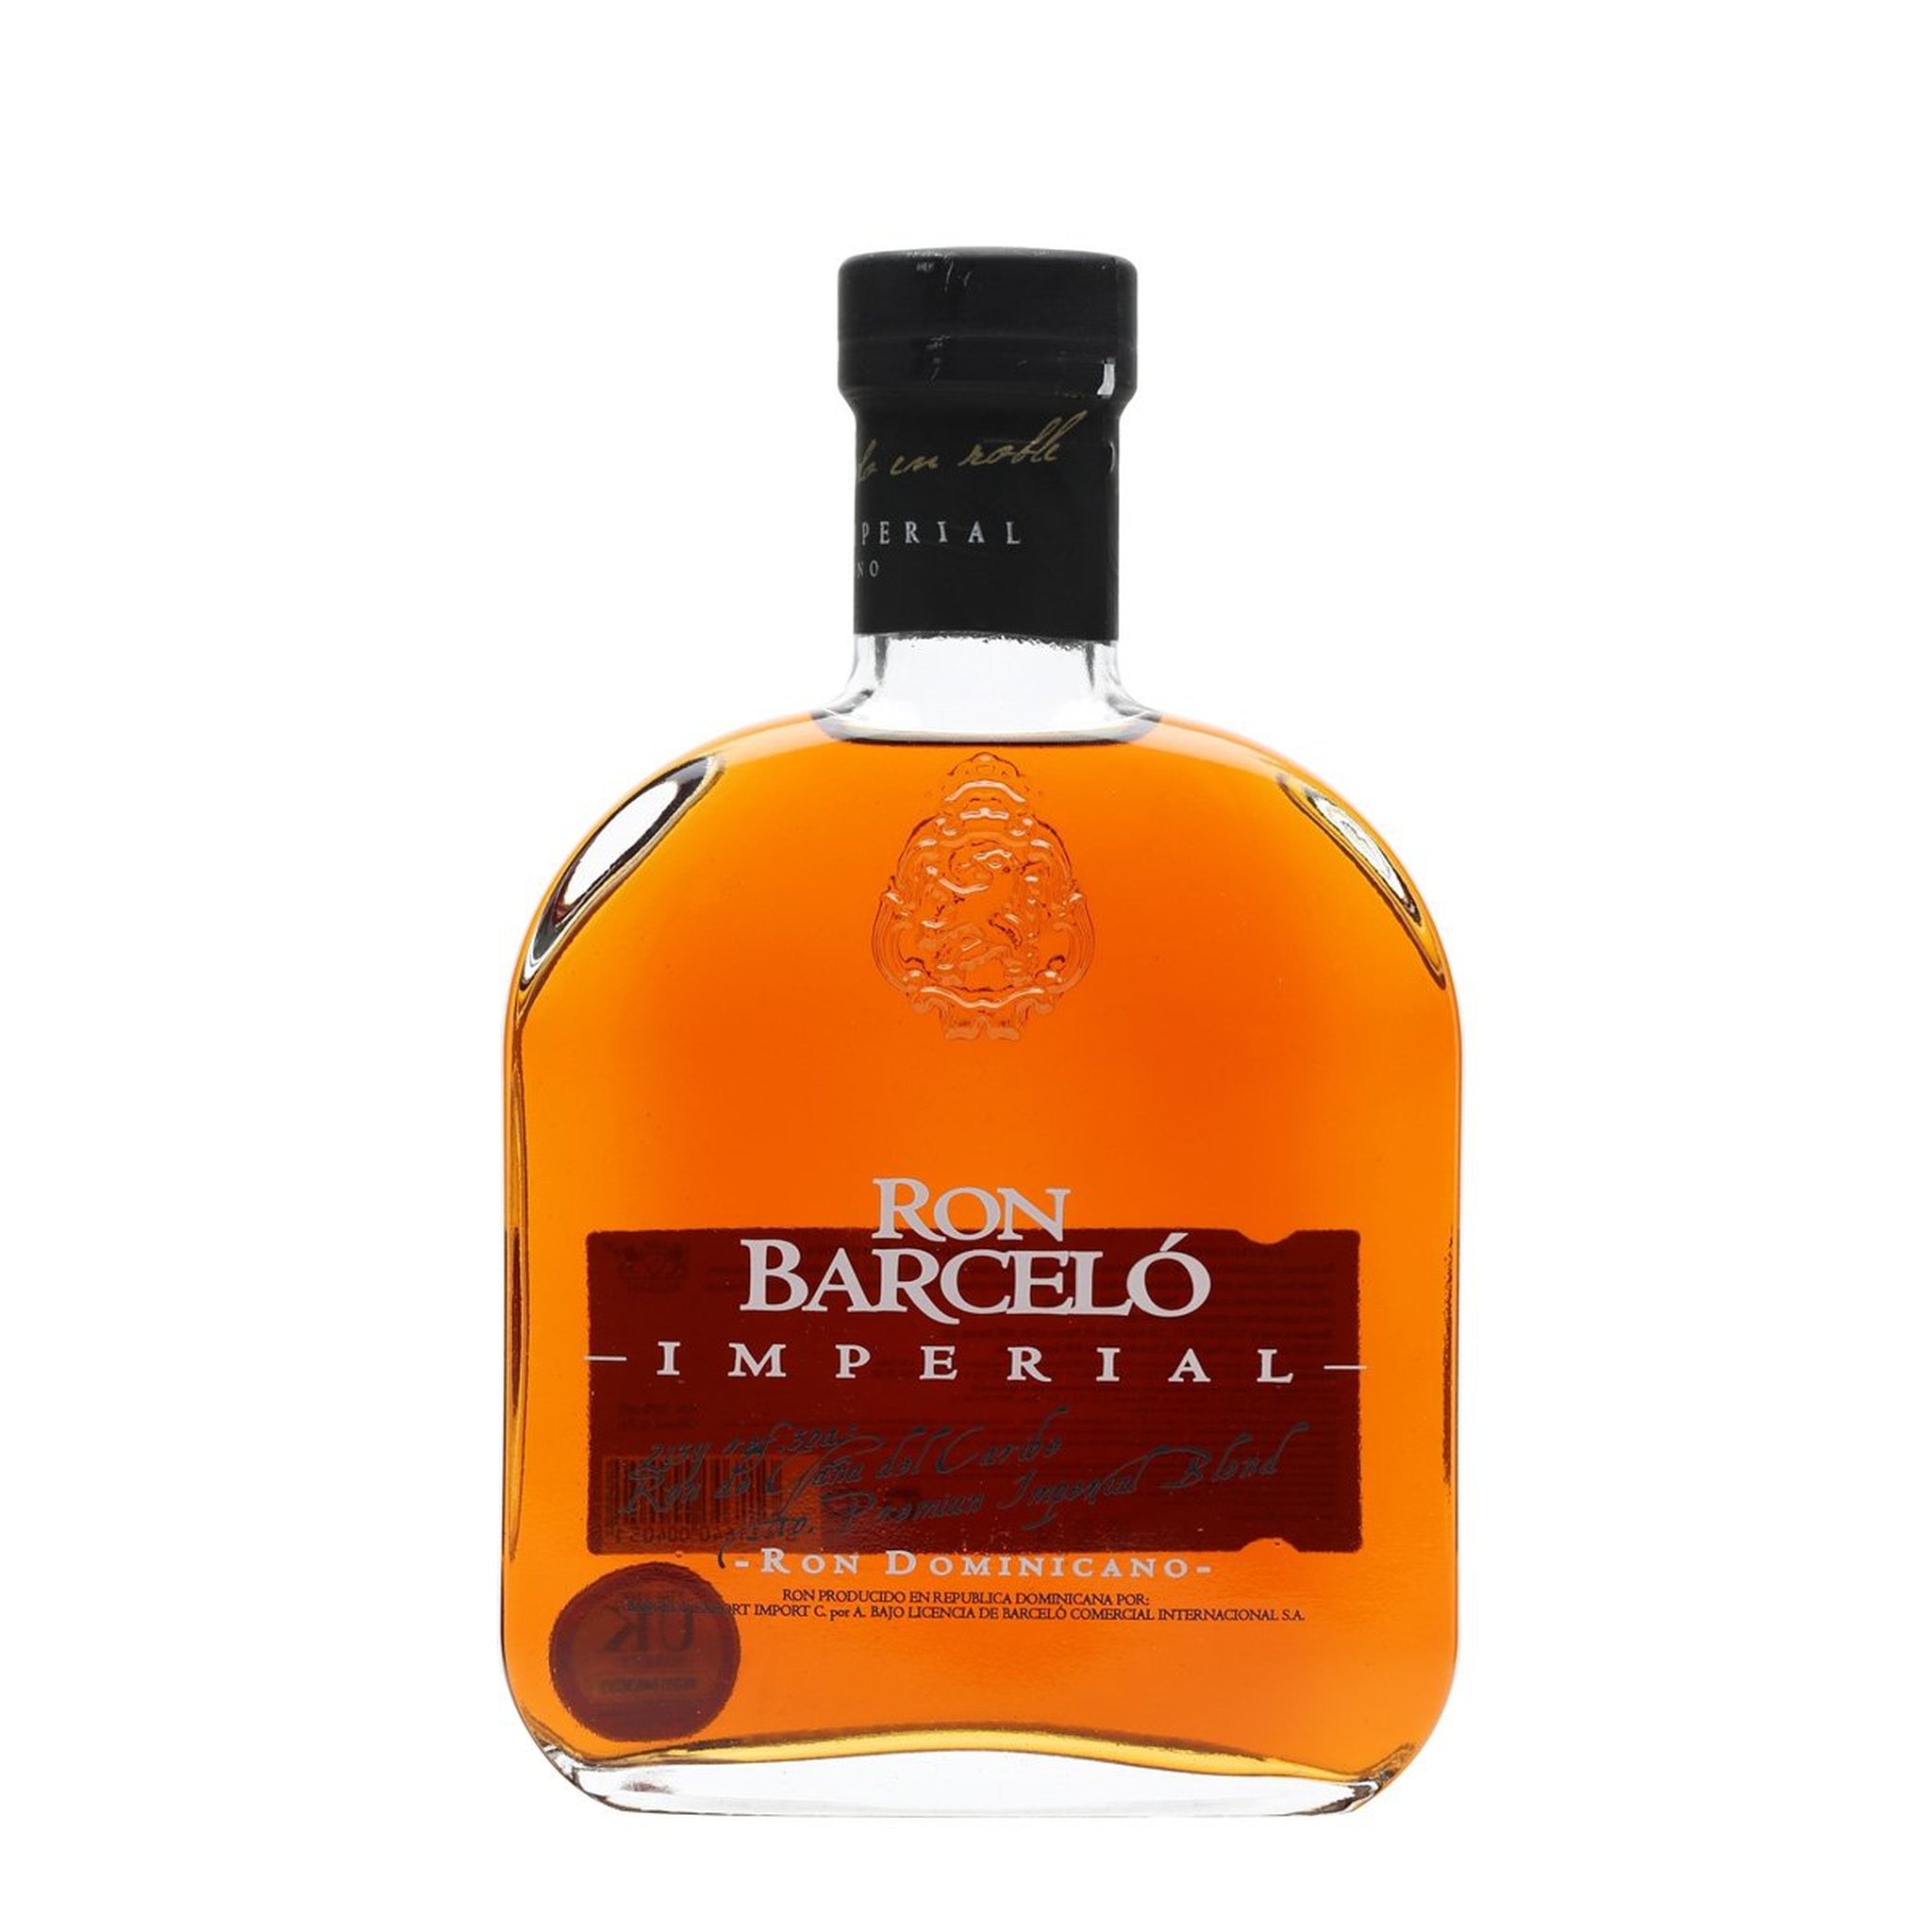 Ron Barcelo Imperial (70 cl.)